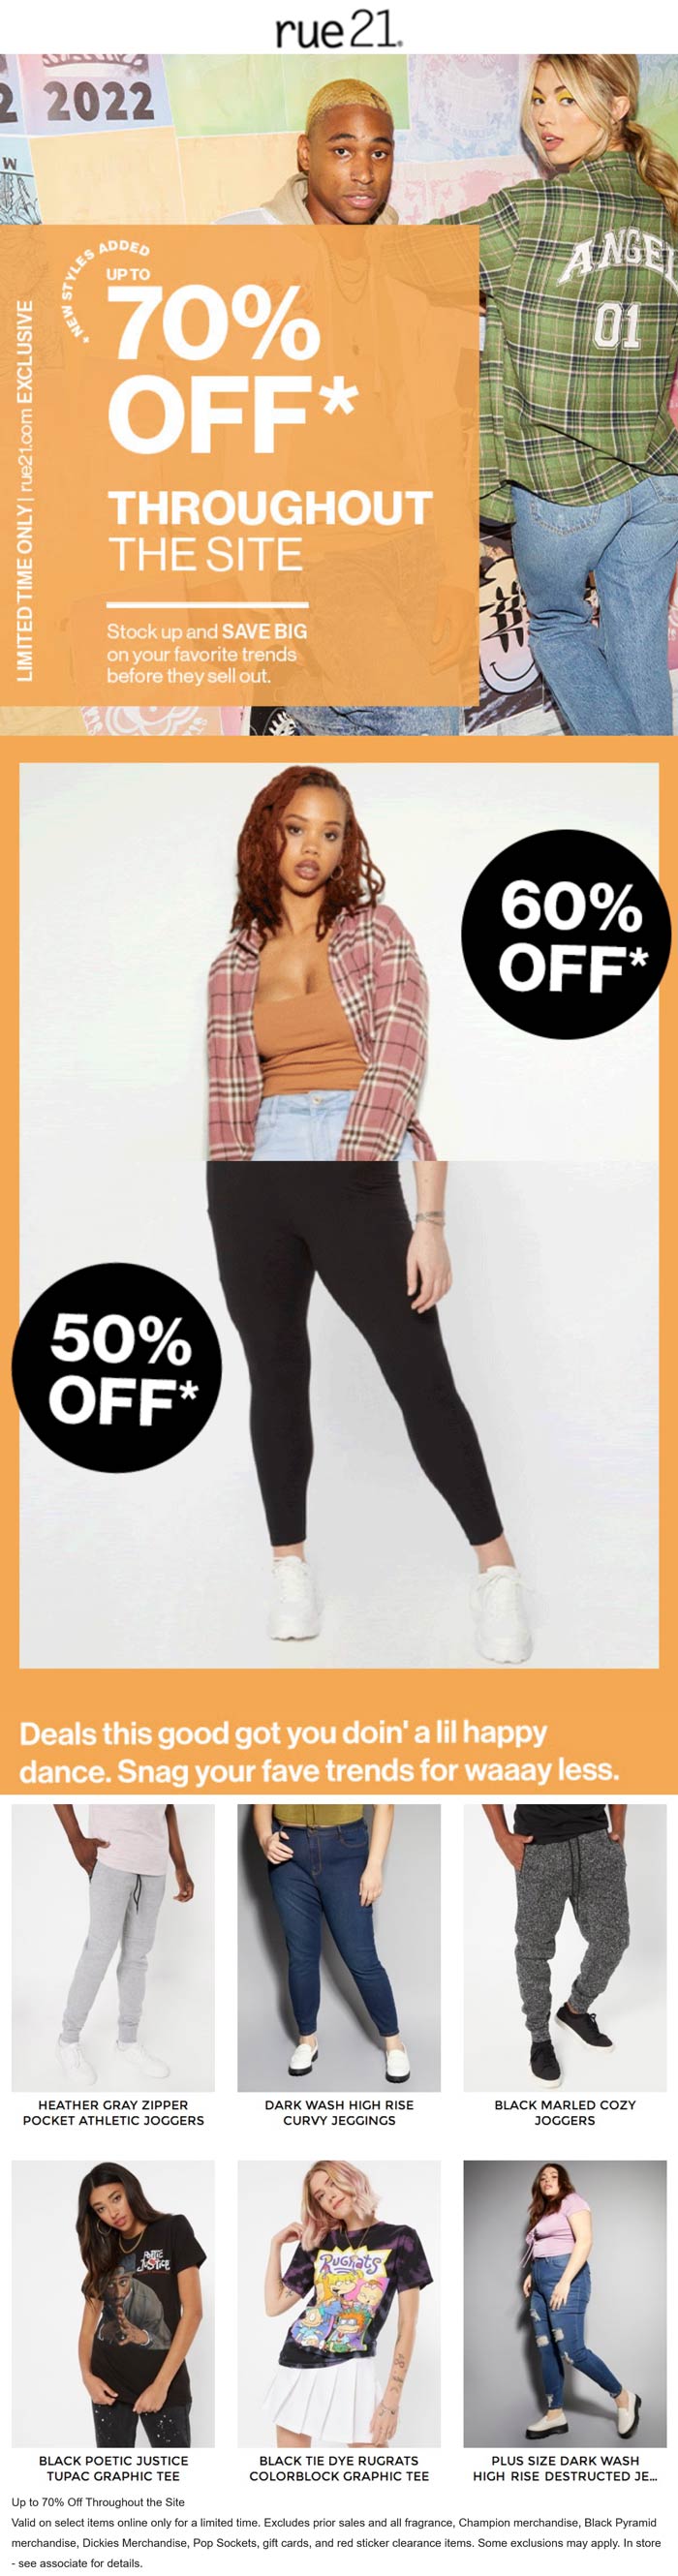 rue21 stores Coupon  60-70% off clearance going on online at rue21 #rue21 